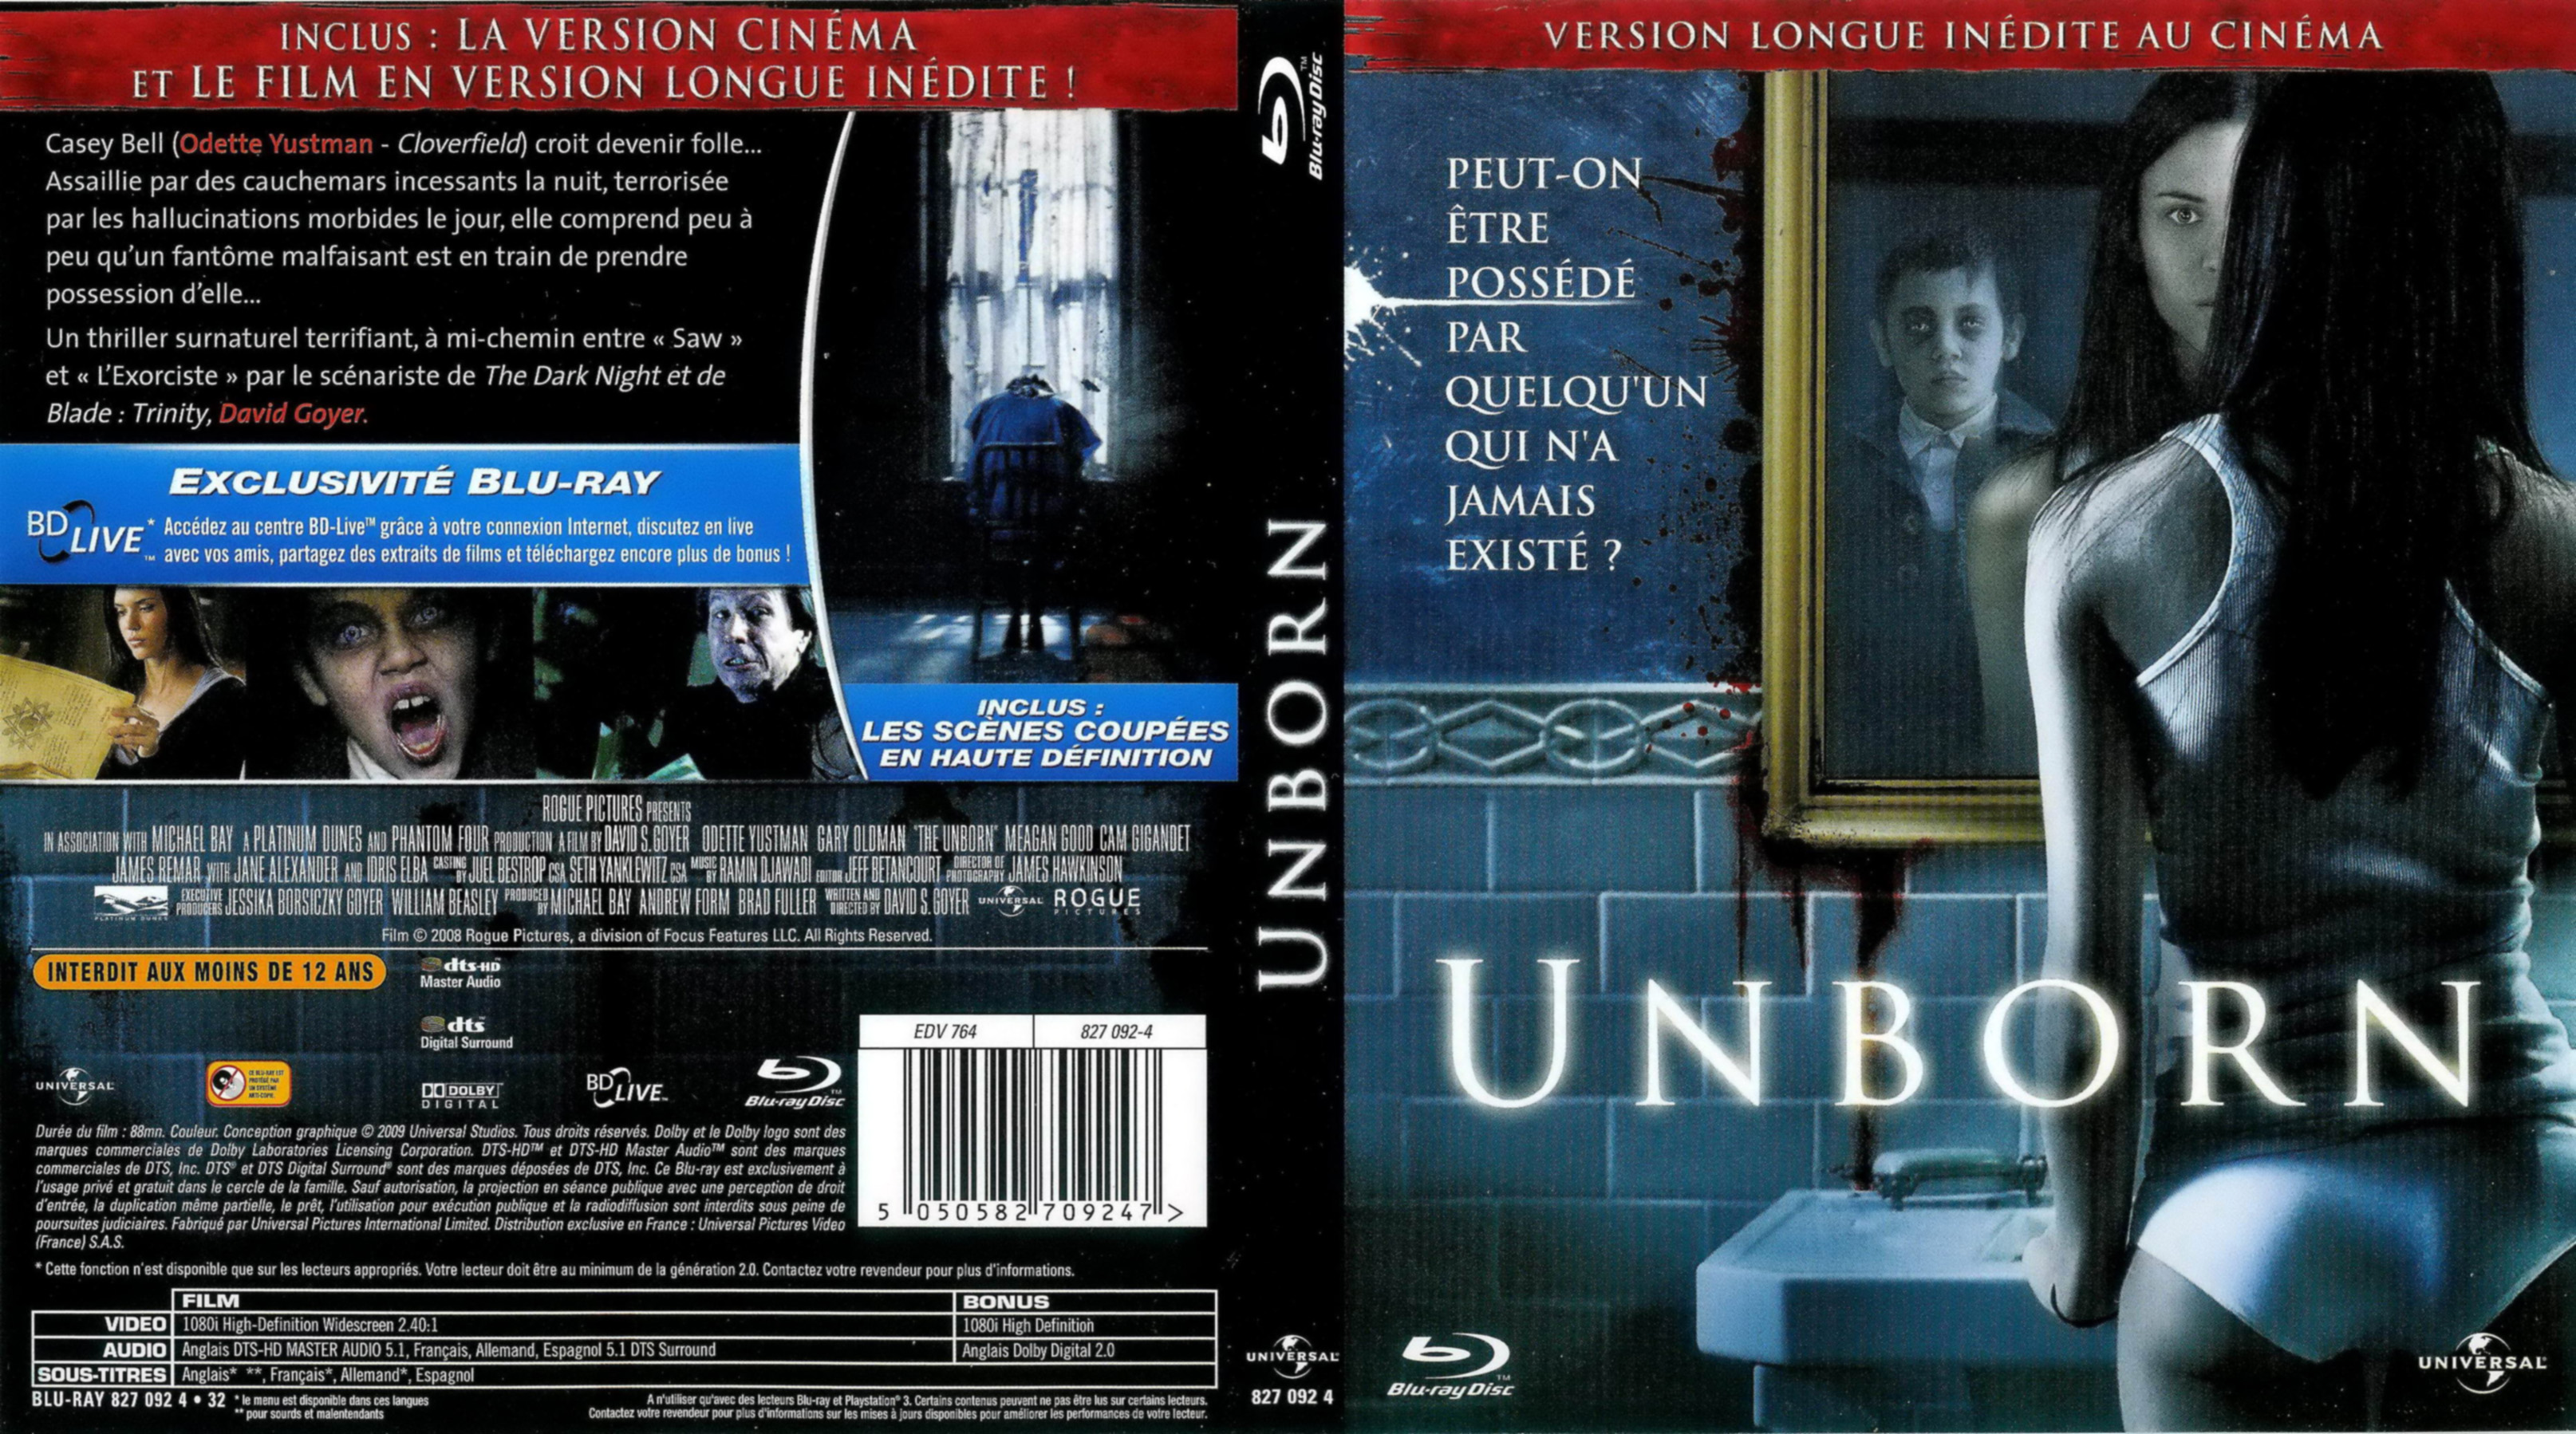 Jaquette DVD Unborn (BLU-RAY)